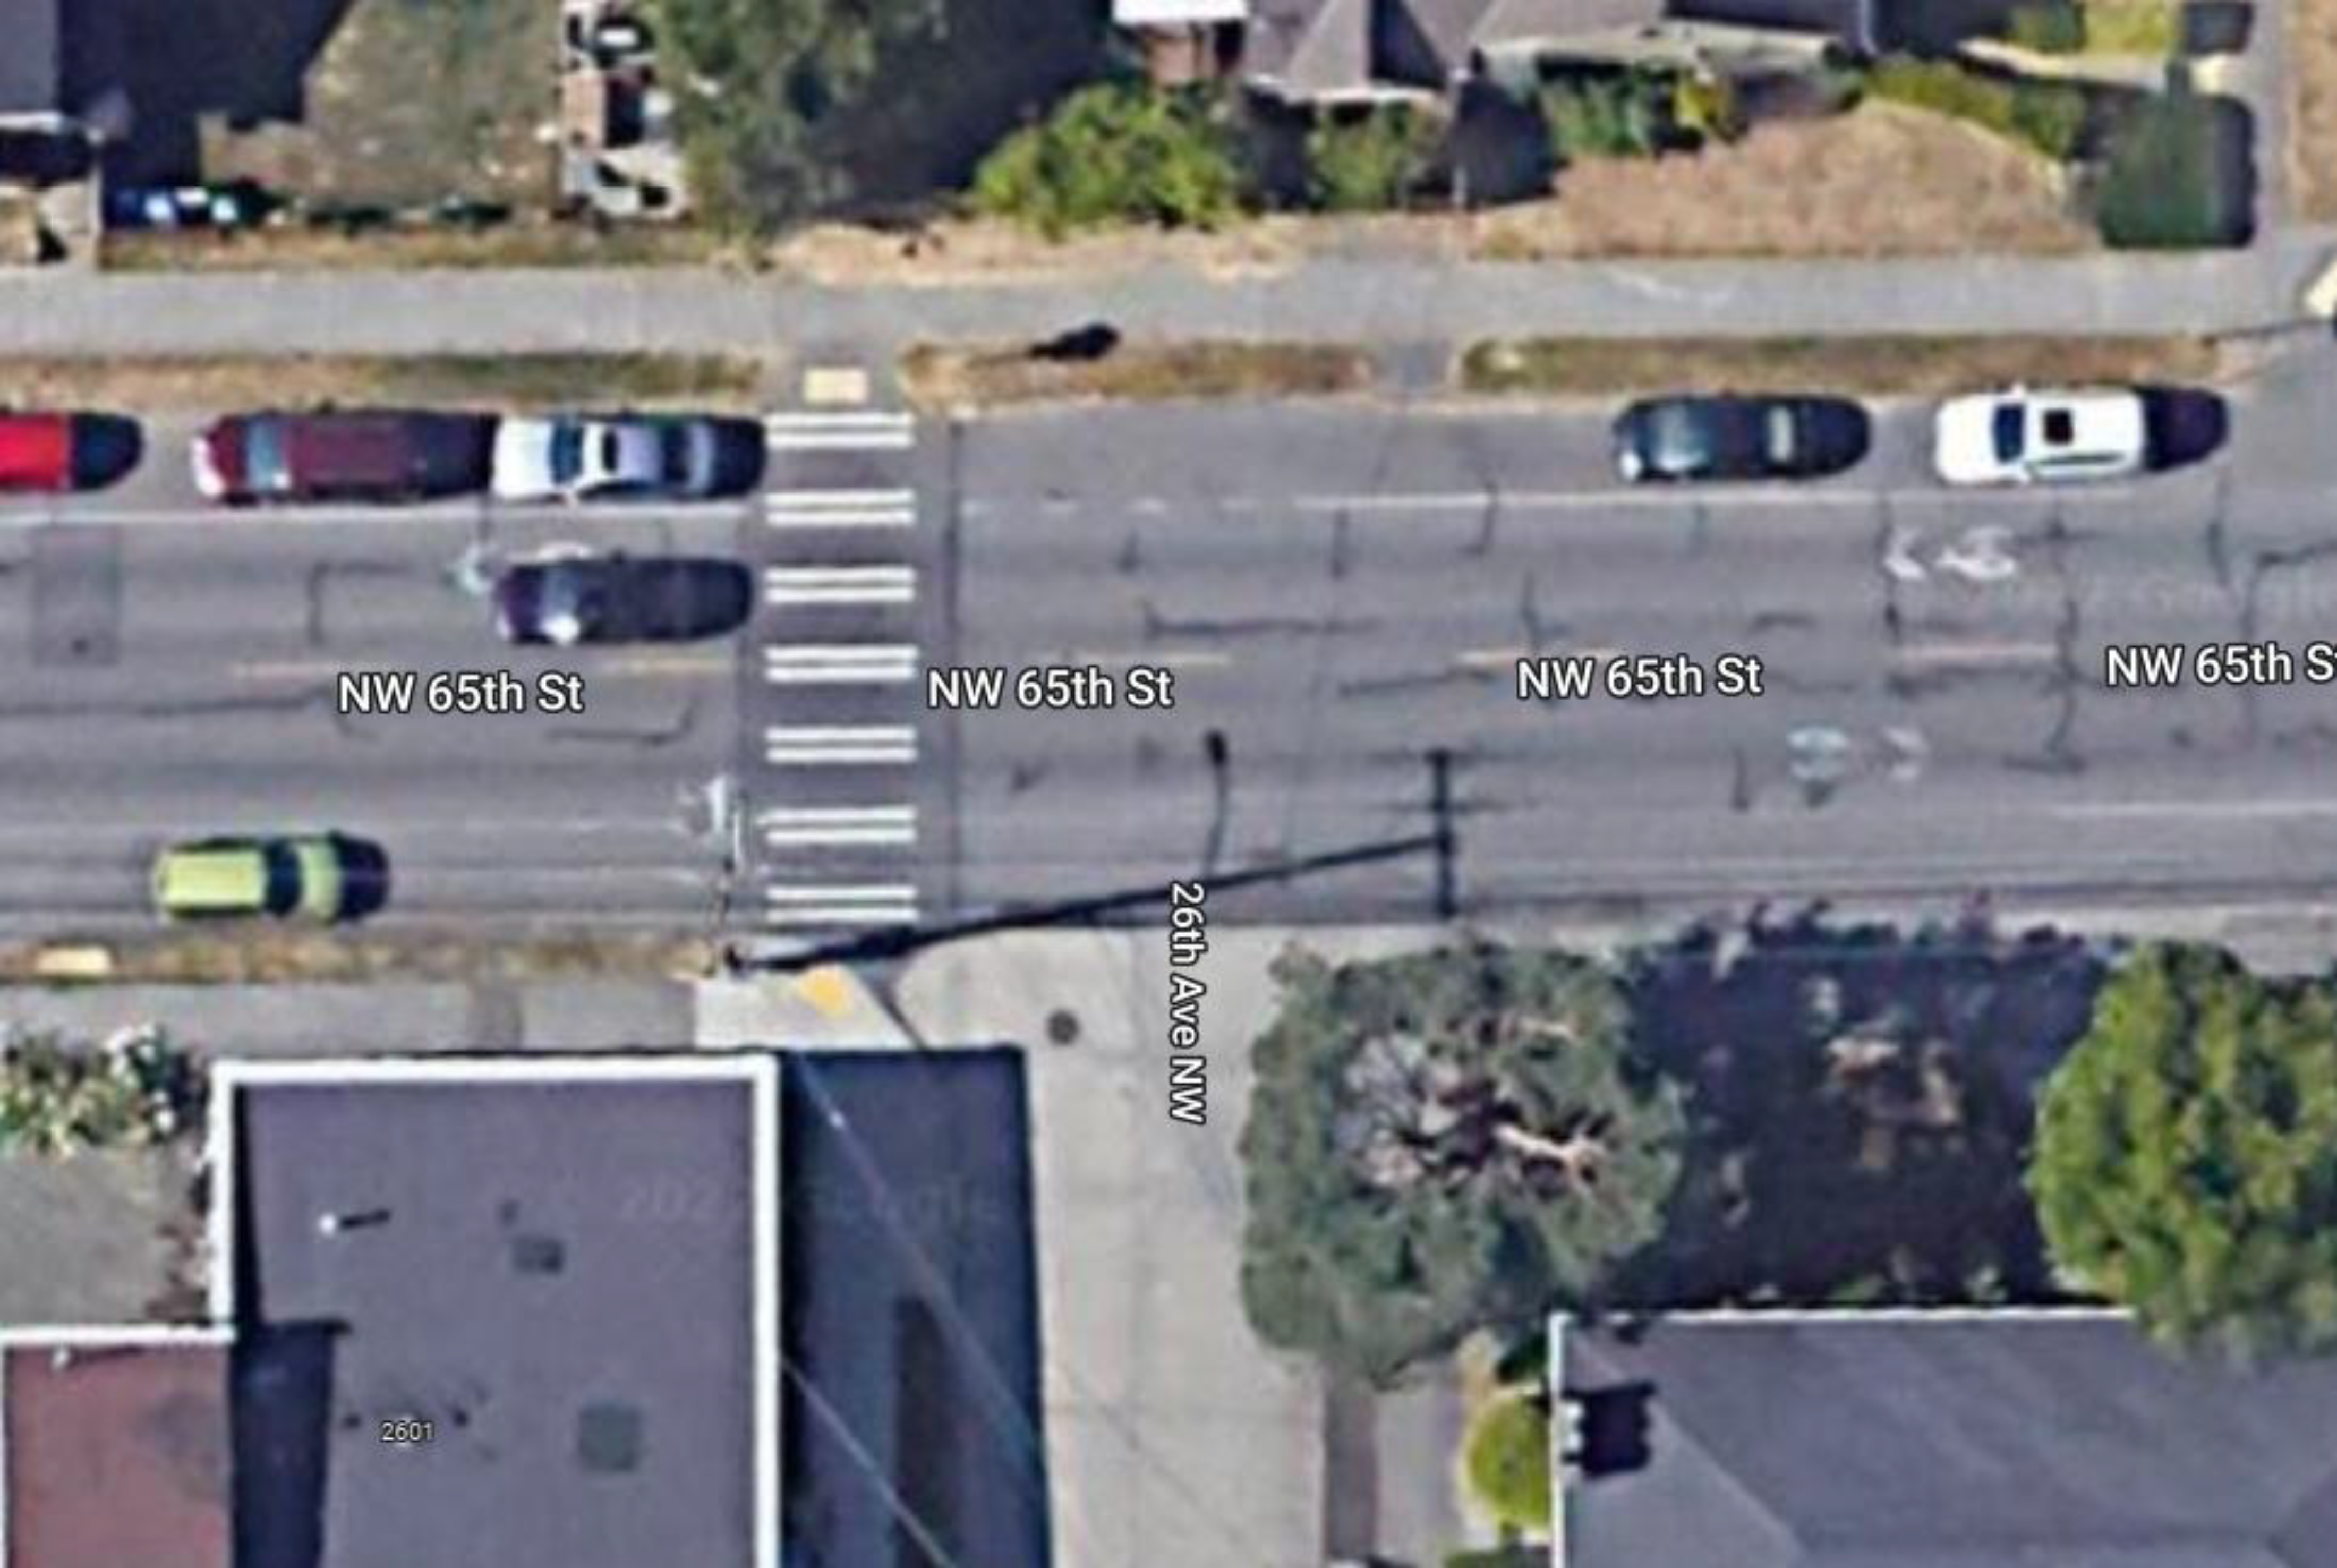 Satellite image of NW 65th St & 26th Ave NW intersection showing where new pavement markings will go